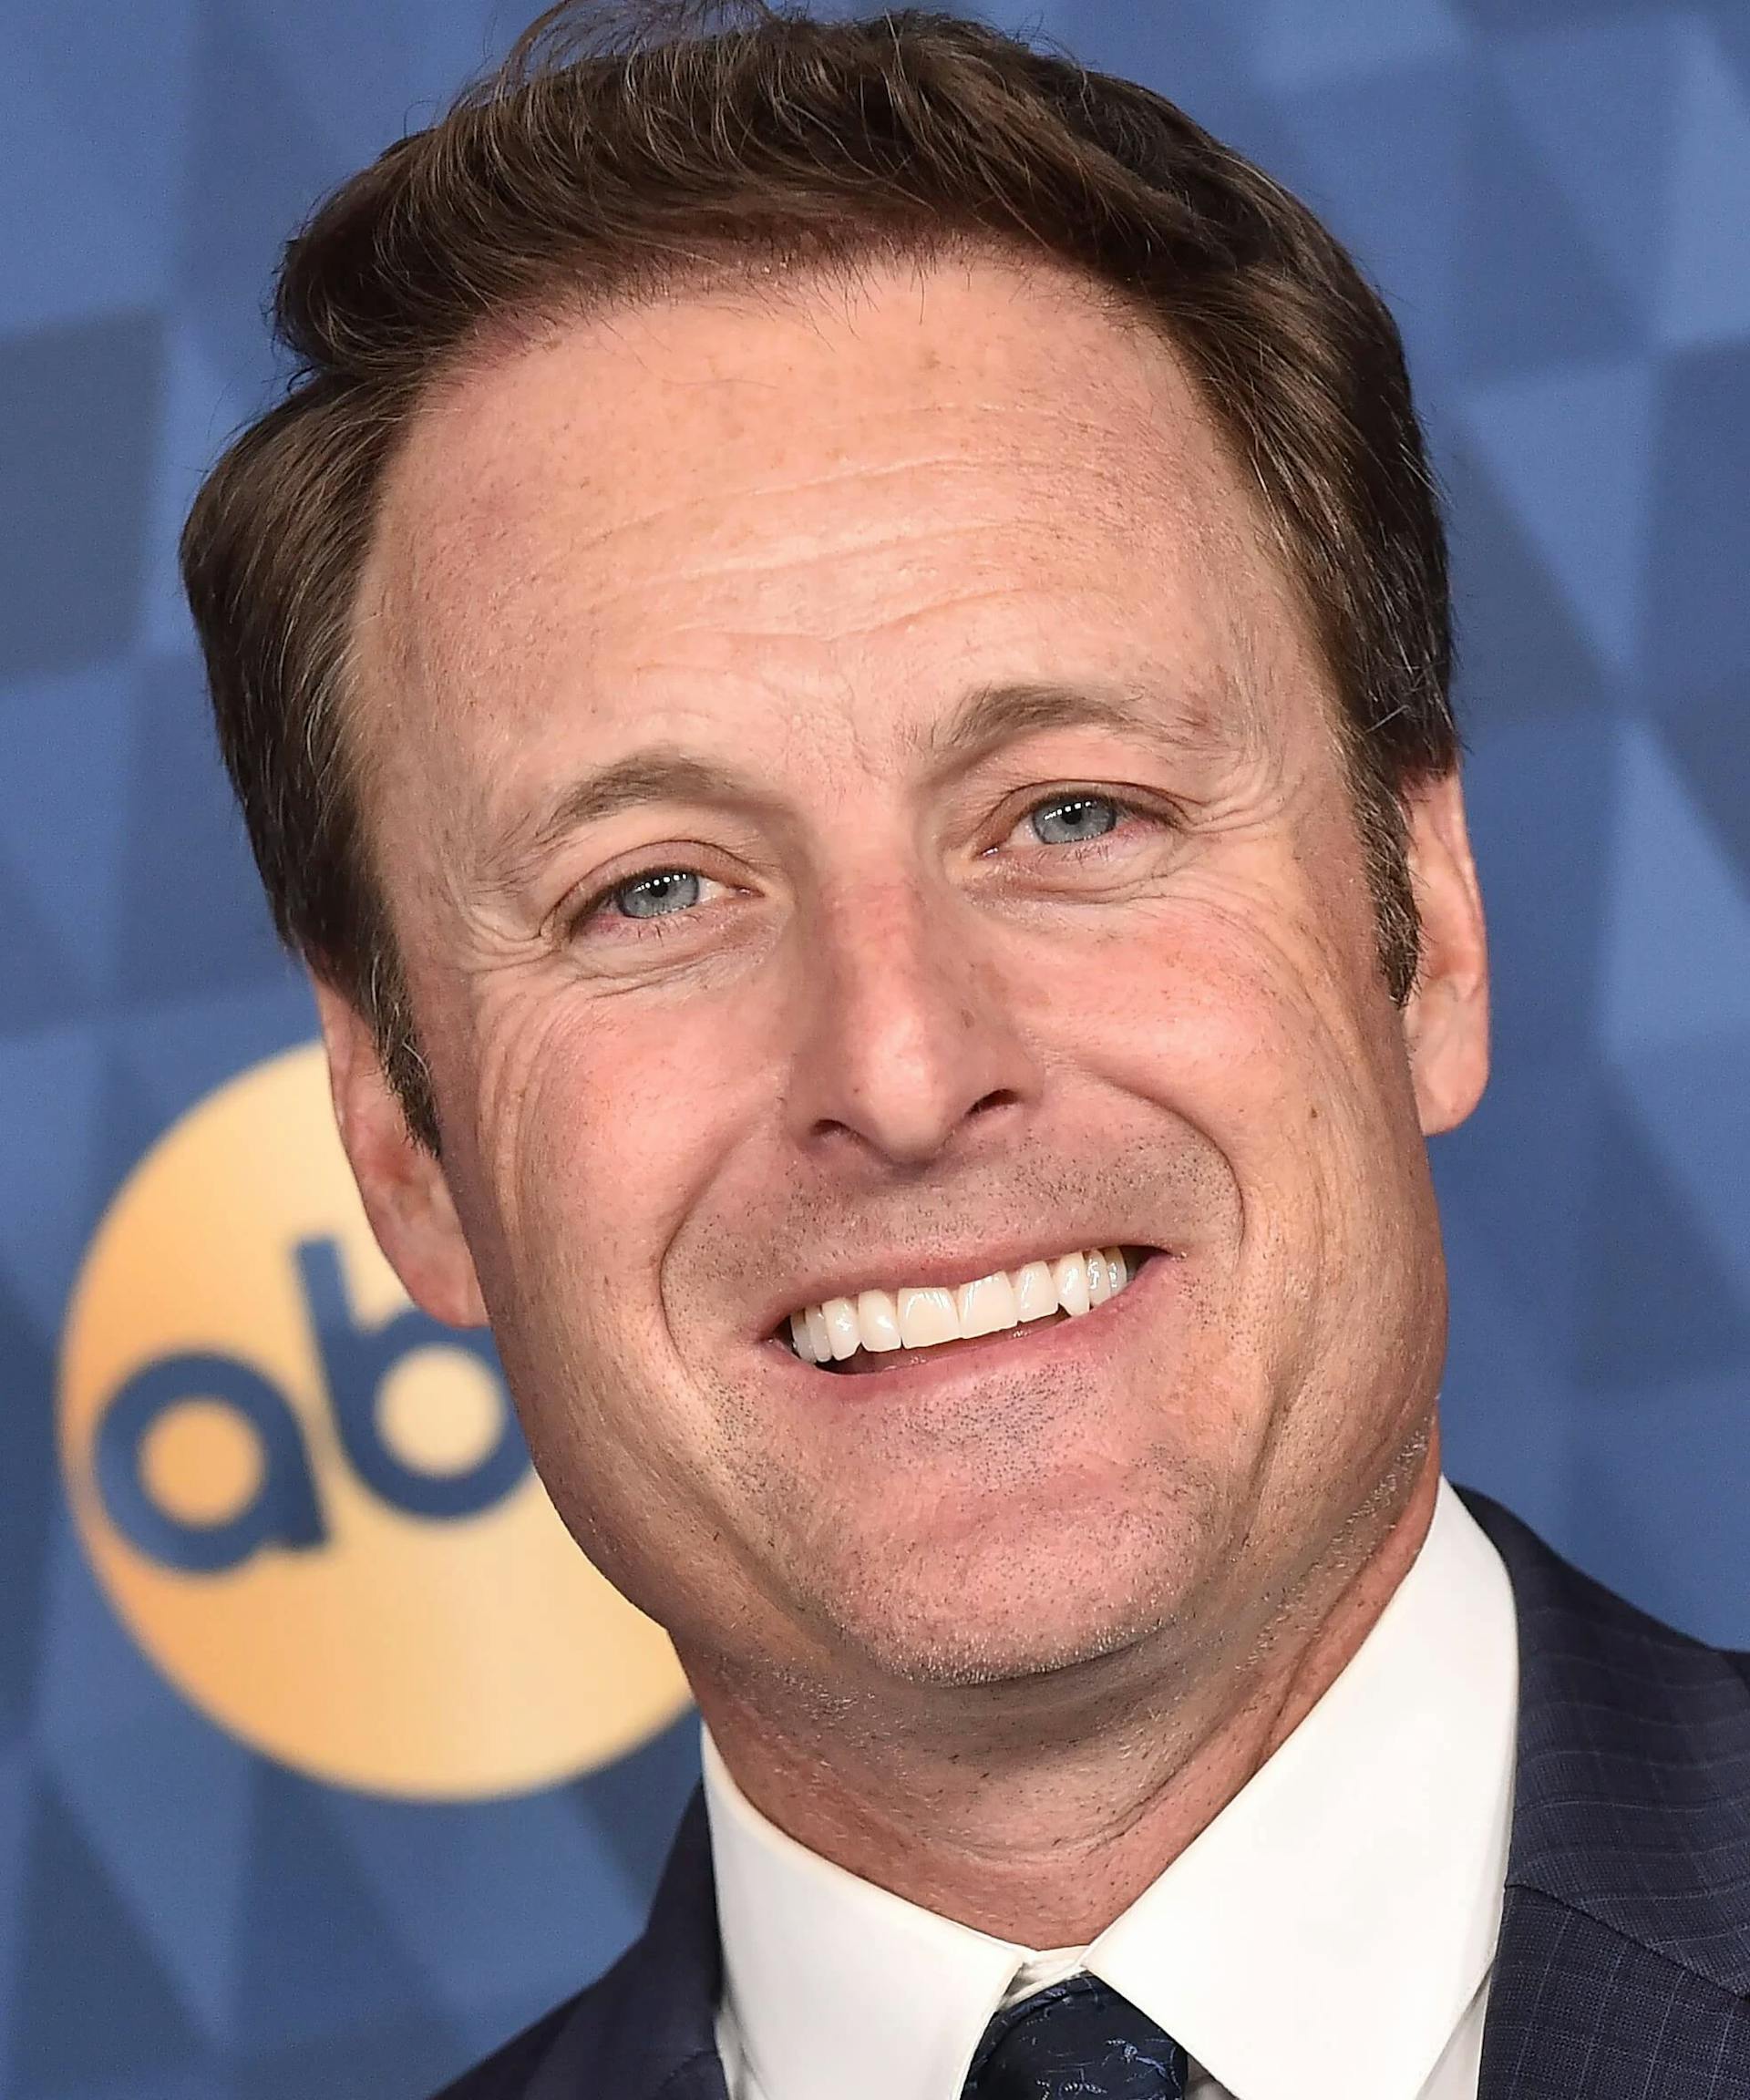 Cancel Culture Comes For Chris Harrison, Ending His Bachelor Nation Years